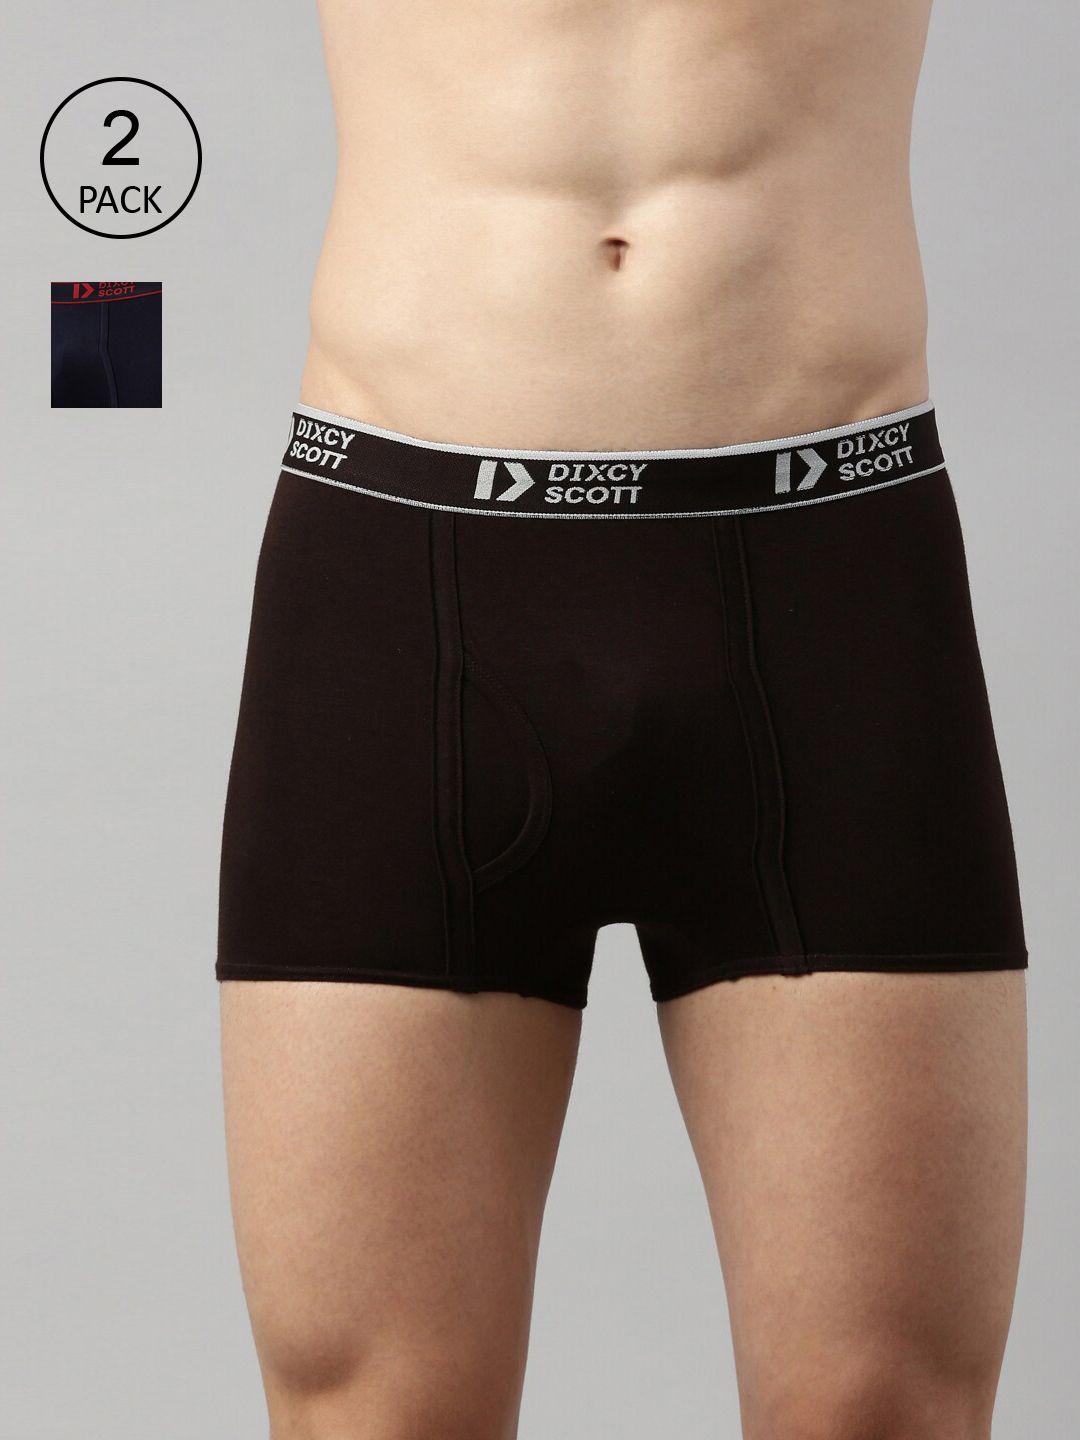 dixcy scott men pack of 2 coffee brown & navy blue solid pure cotton snug fit trunks